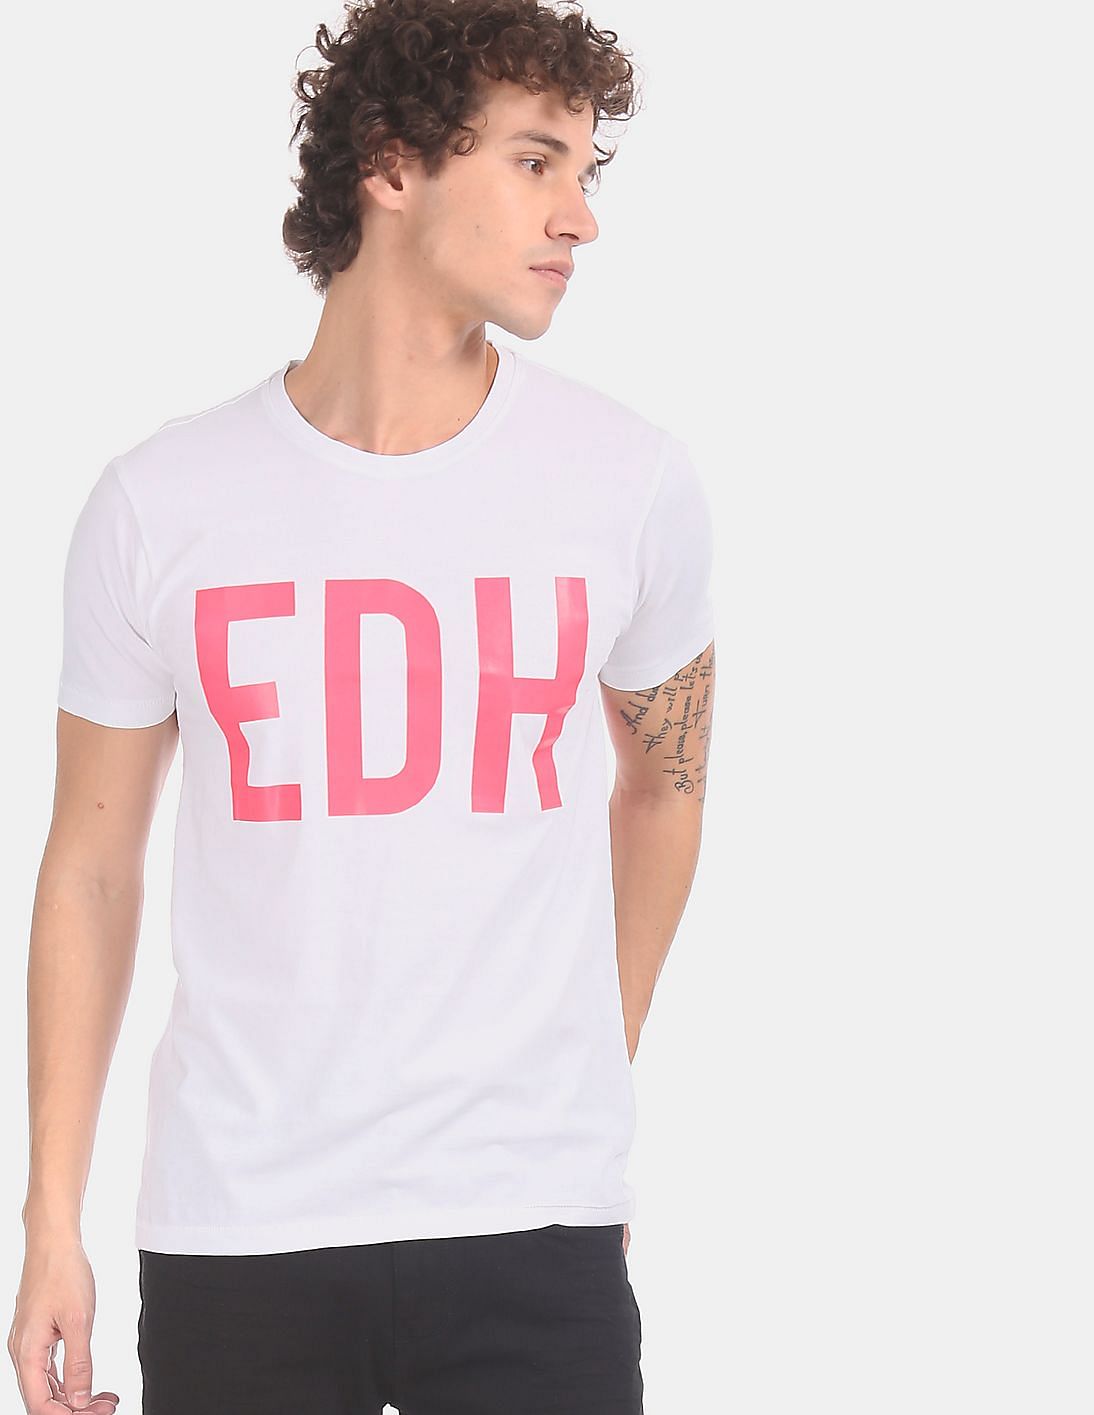 ed hardy t shirts price in india